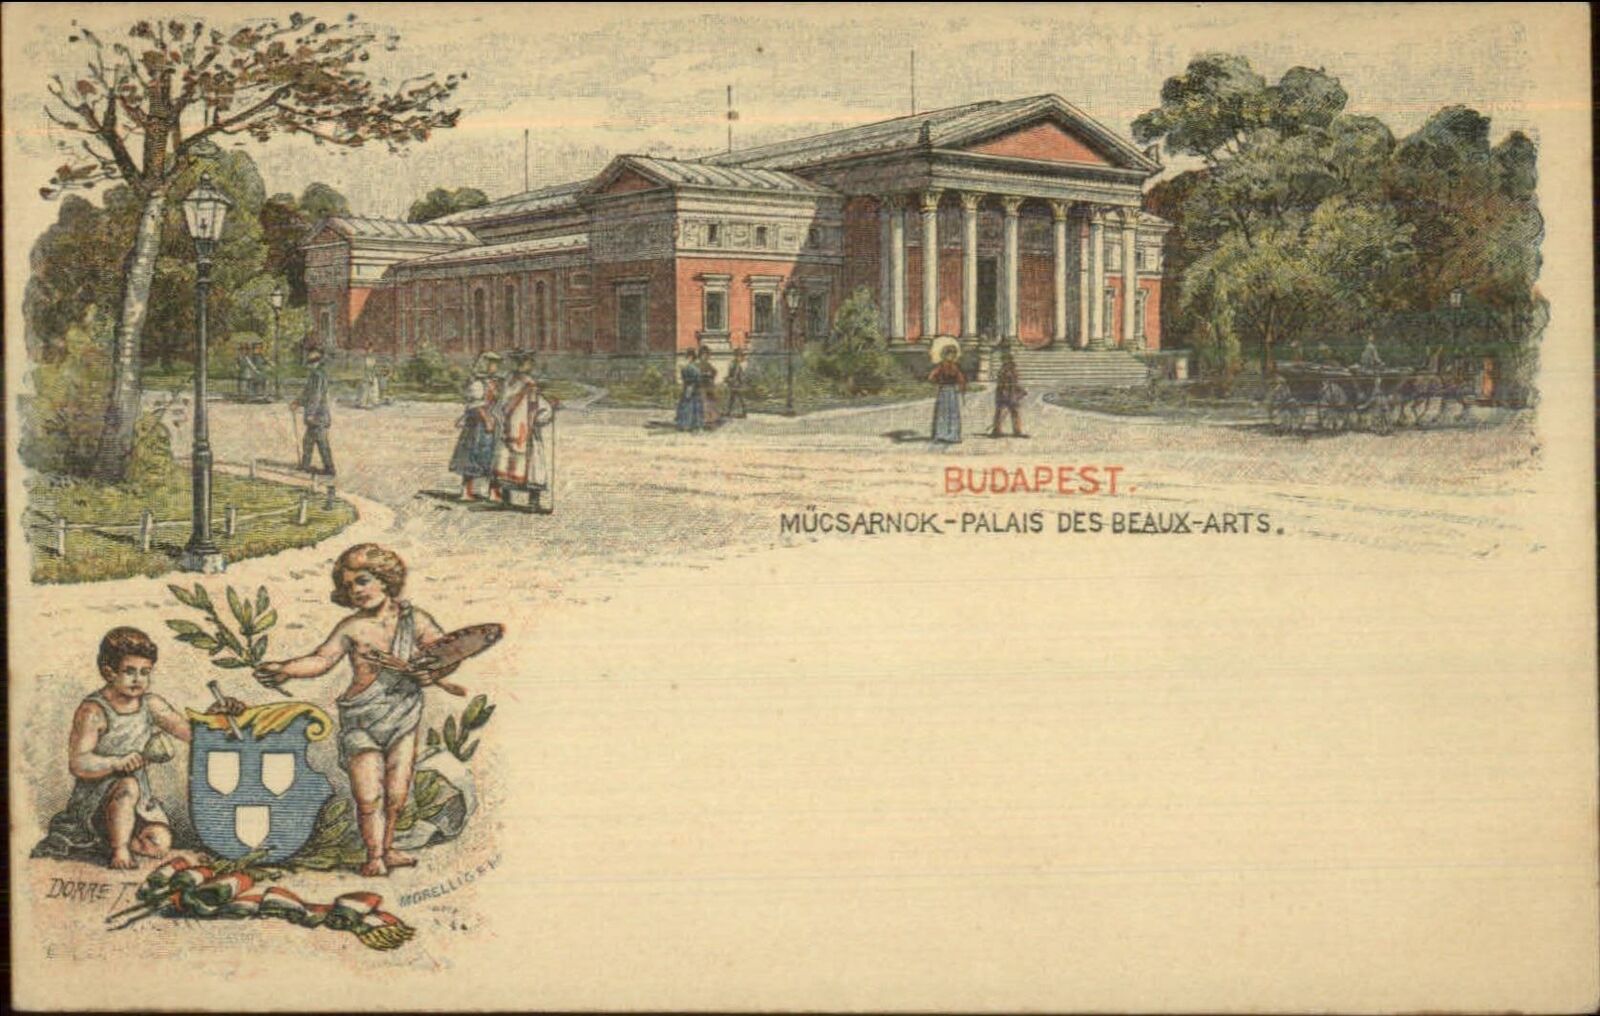 Budapest Hungary 1890s Postal Card in Color Mucsarnok Palais Beaux Arts